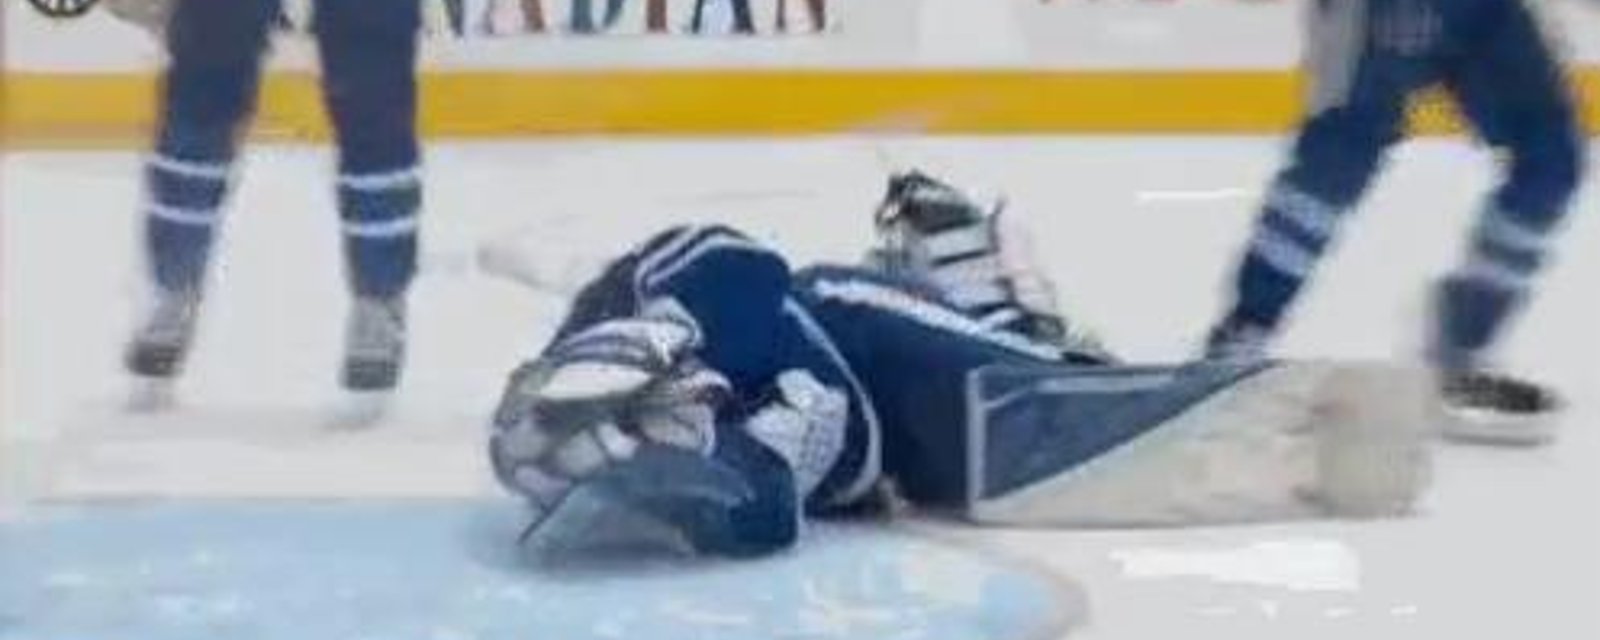 BREAKING : Frederik Andersen possible concussion following nasty Sestito's headshot. 